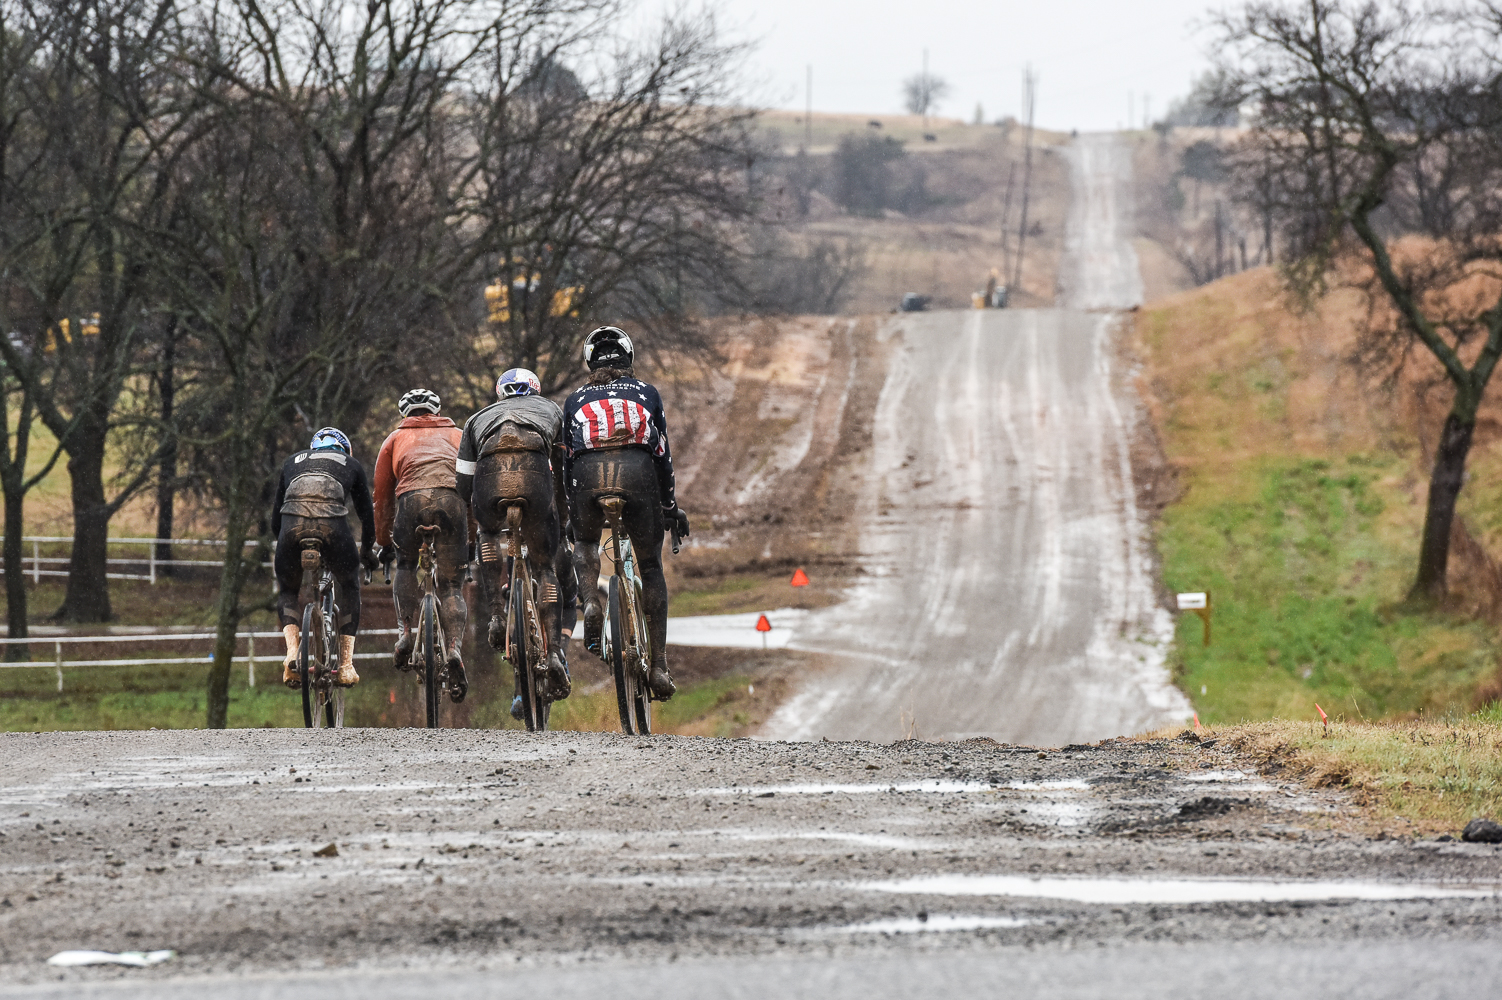 the mid south gravel race